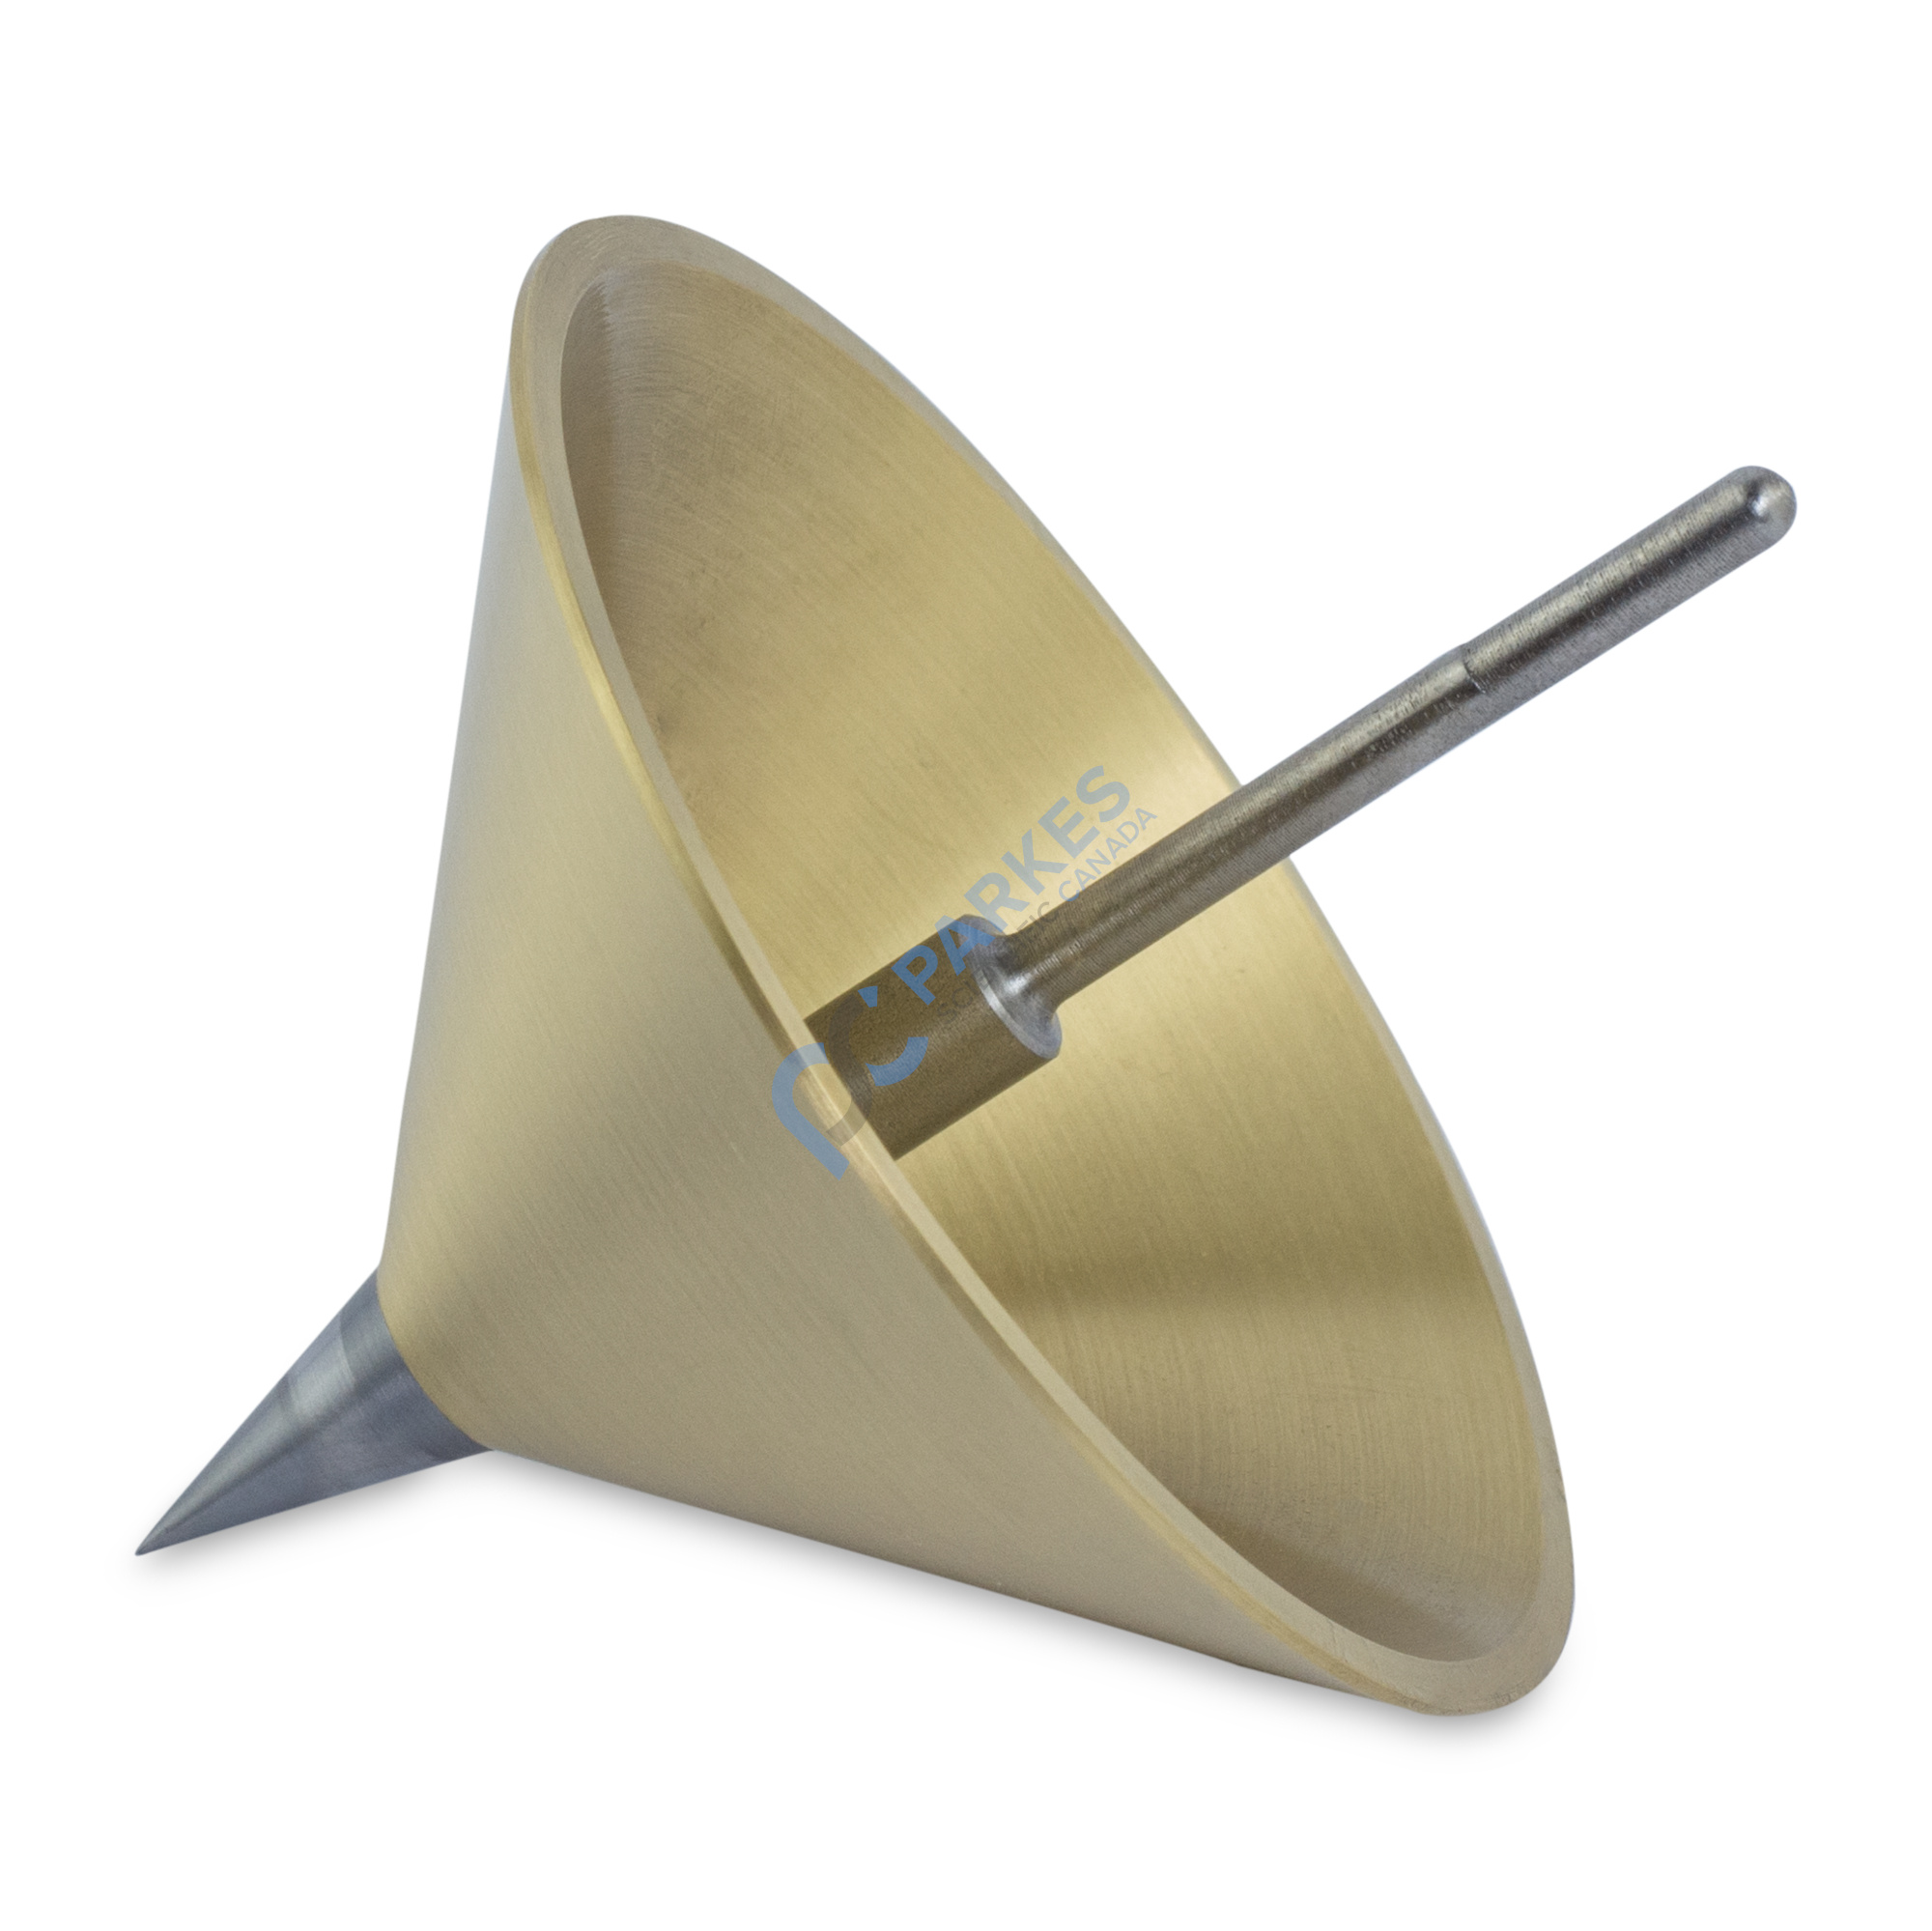 Penetrometer Cone, Brass, with Hardened Stainless Steel Tip, 102.5g